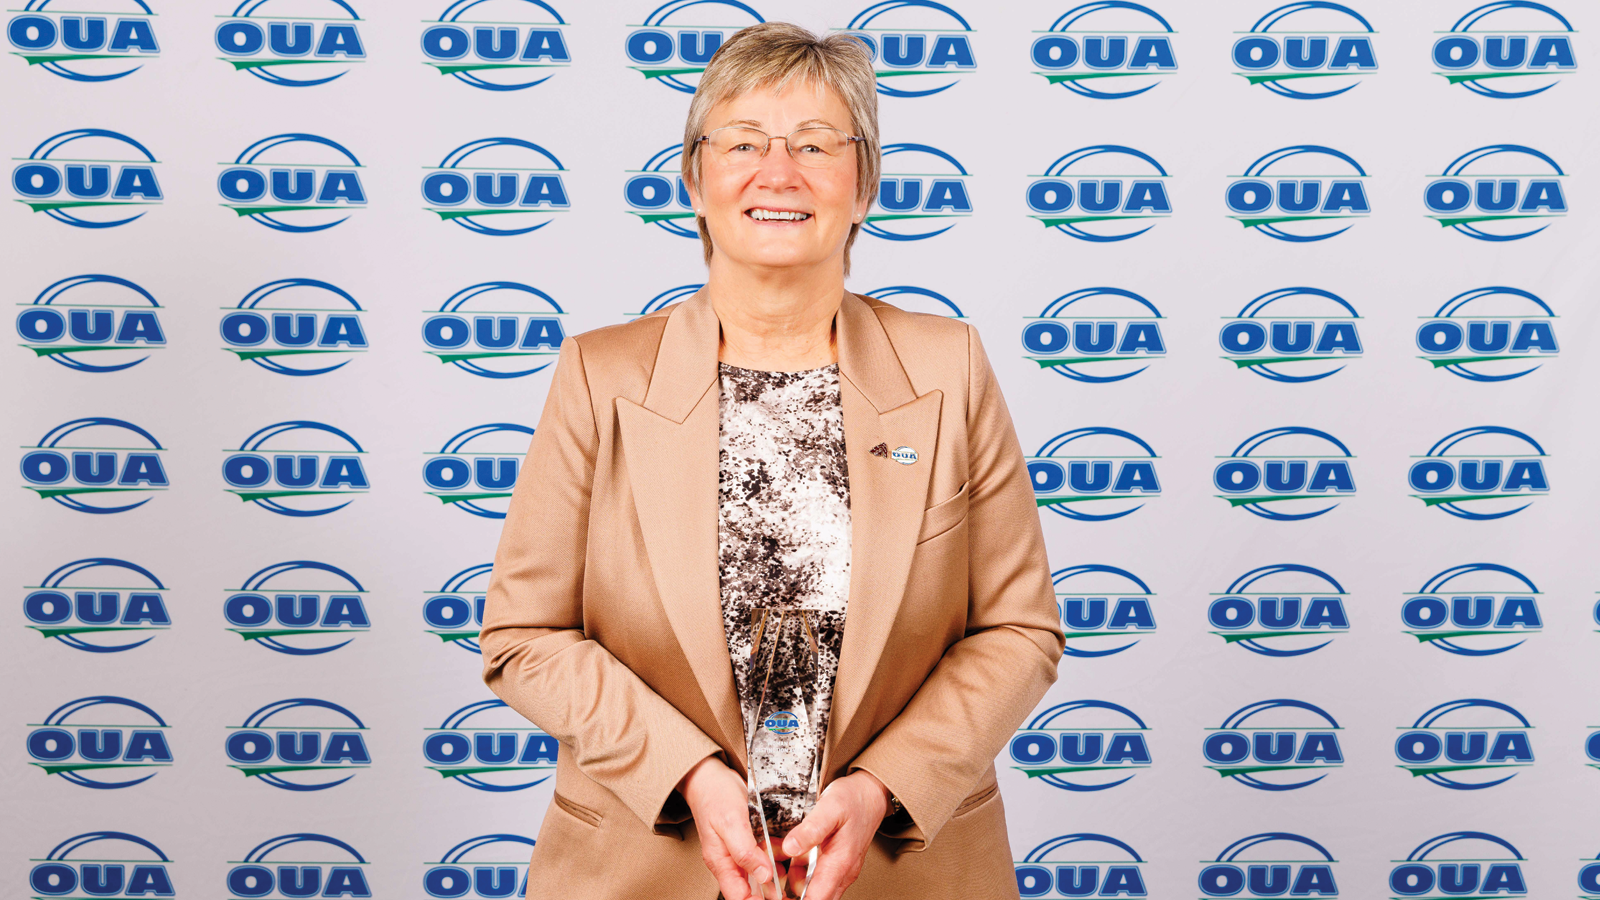 Ottawa's Sue Hylland posing with her OUA Woman of Distinction Award in front of an OUA step-and-repeat backdrop